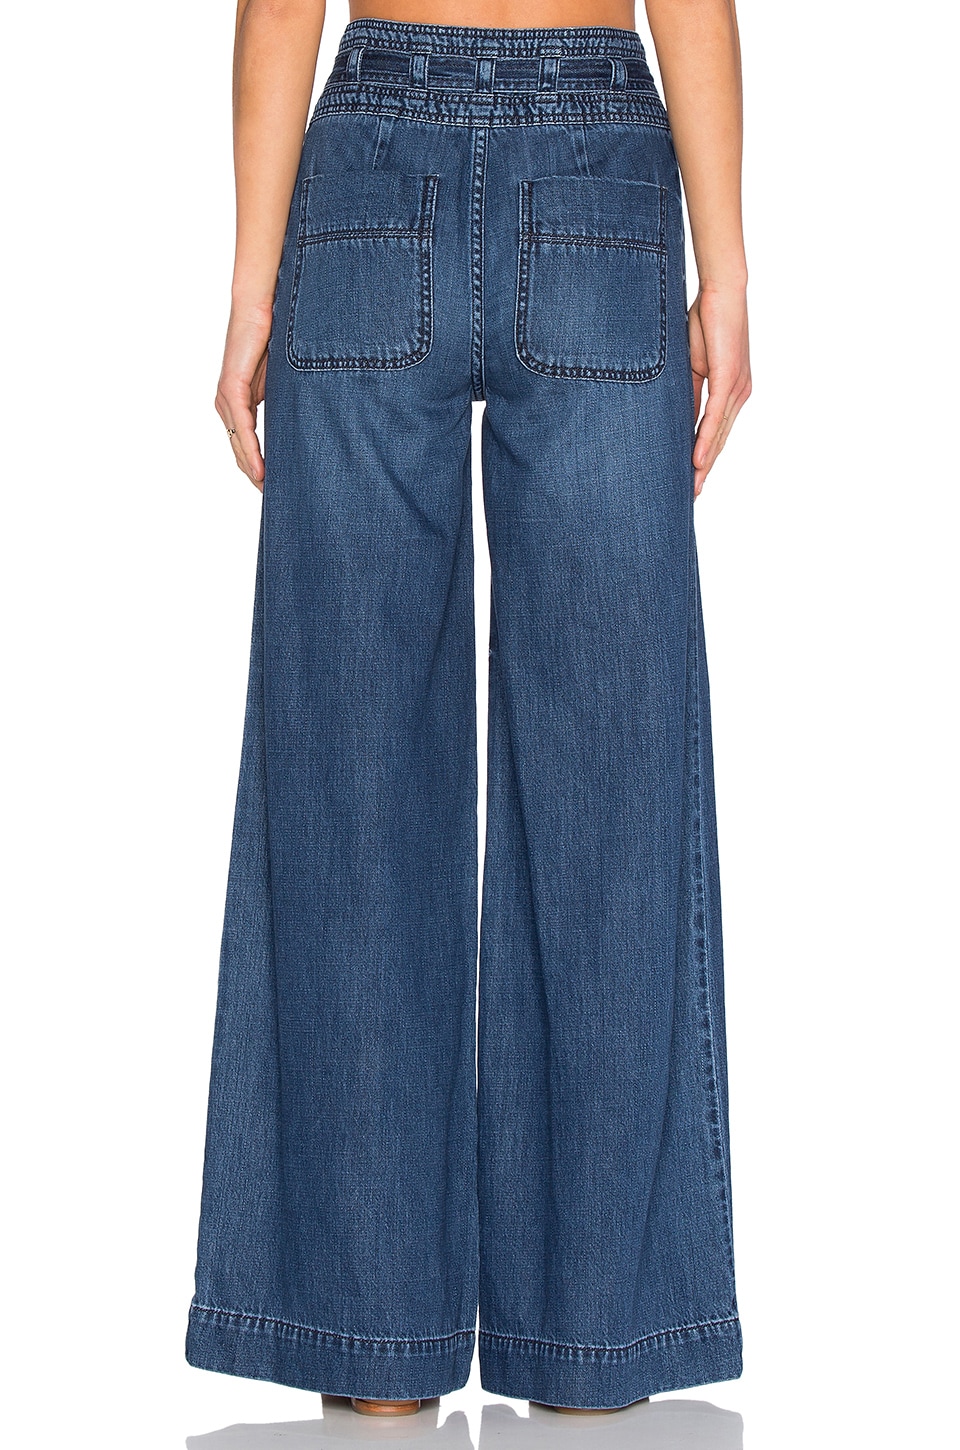 Free People Belted Flare Jean in Maytal Blue | REVOLVE